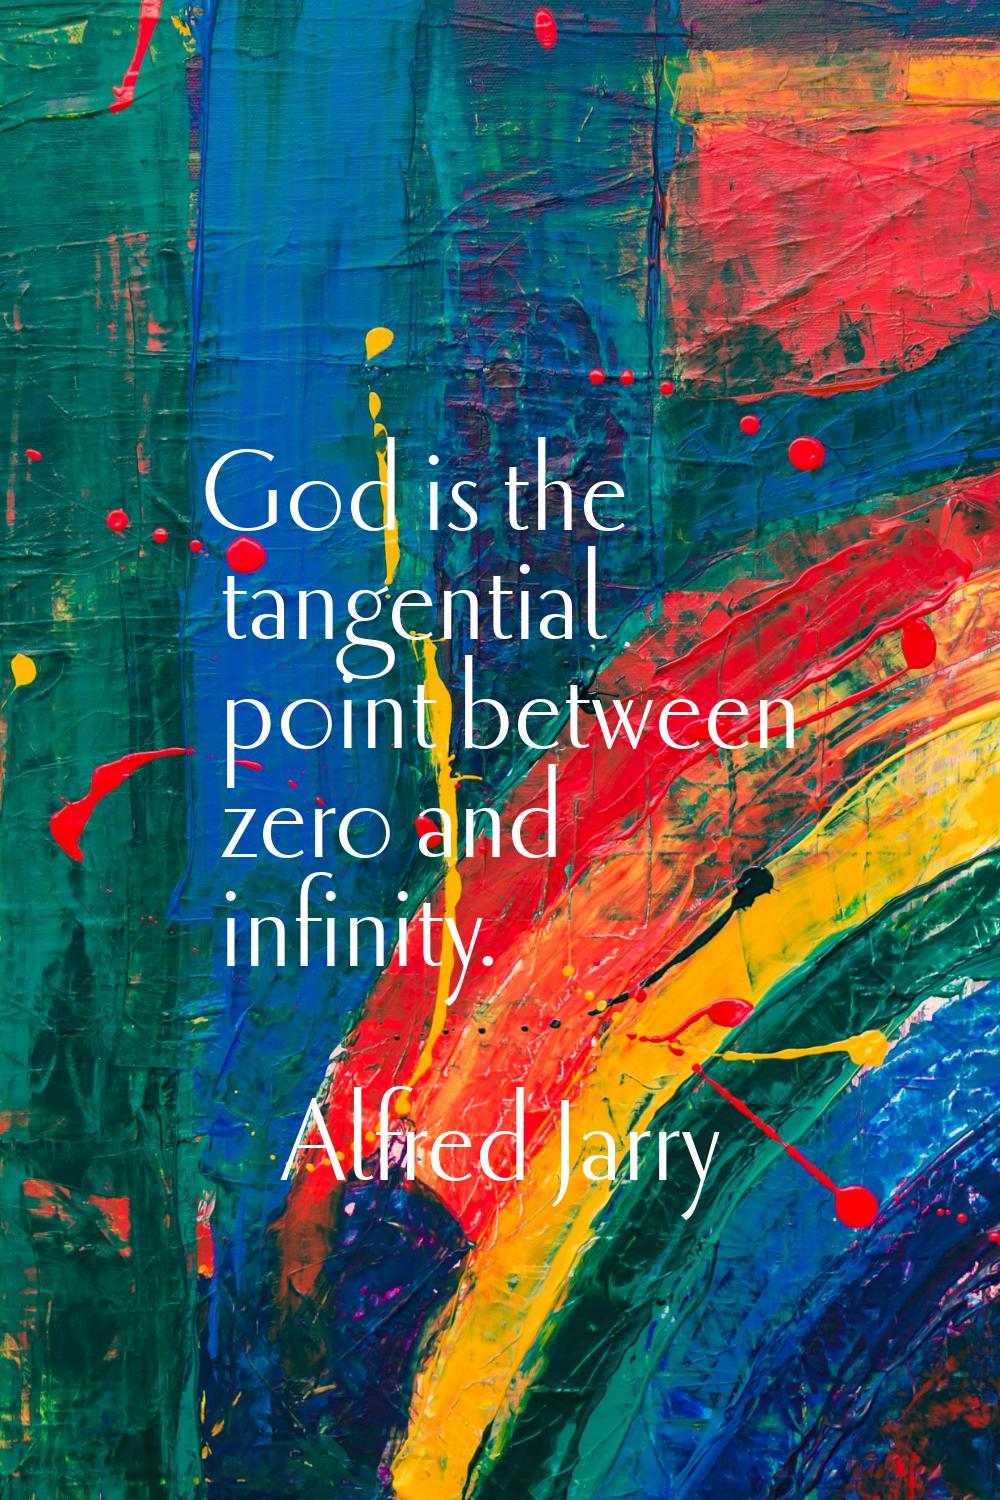 God is the tangential point between zero and infinity.